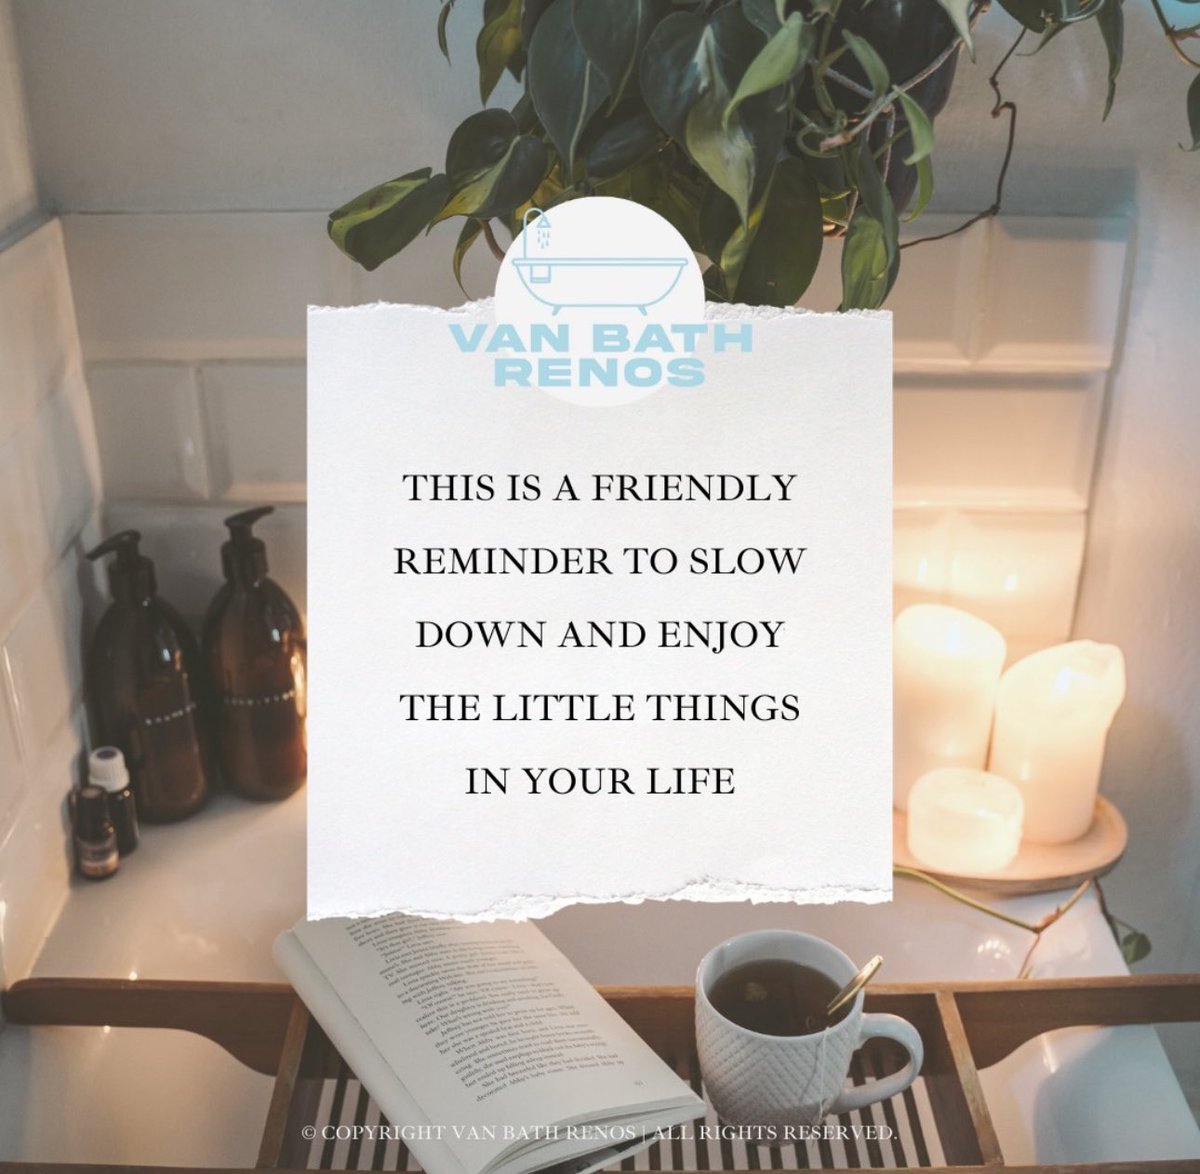 Slow down and enjoy the little things in life. 🛁✨ 

A beautiful bathroom can be your perfect escape. 

#VanBathRenos #EnjoyTheLittleThings #VancouverLiving #YVRLife #HomeSanctuary #BathroomReno